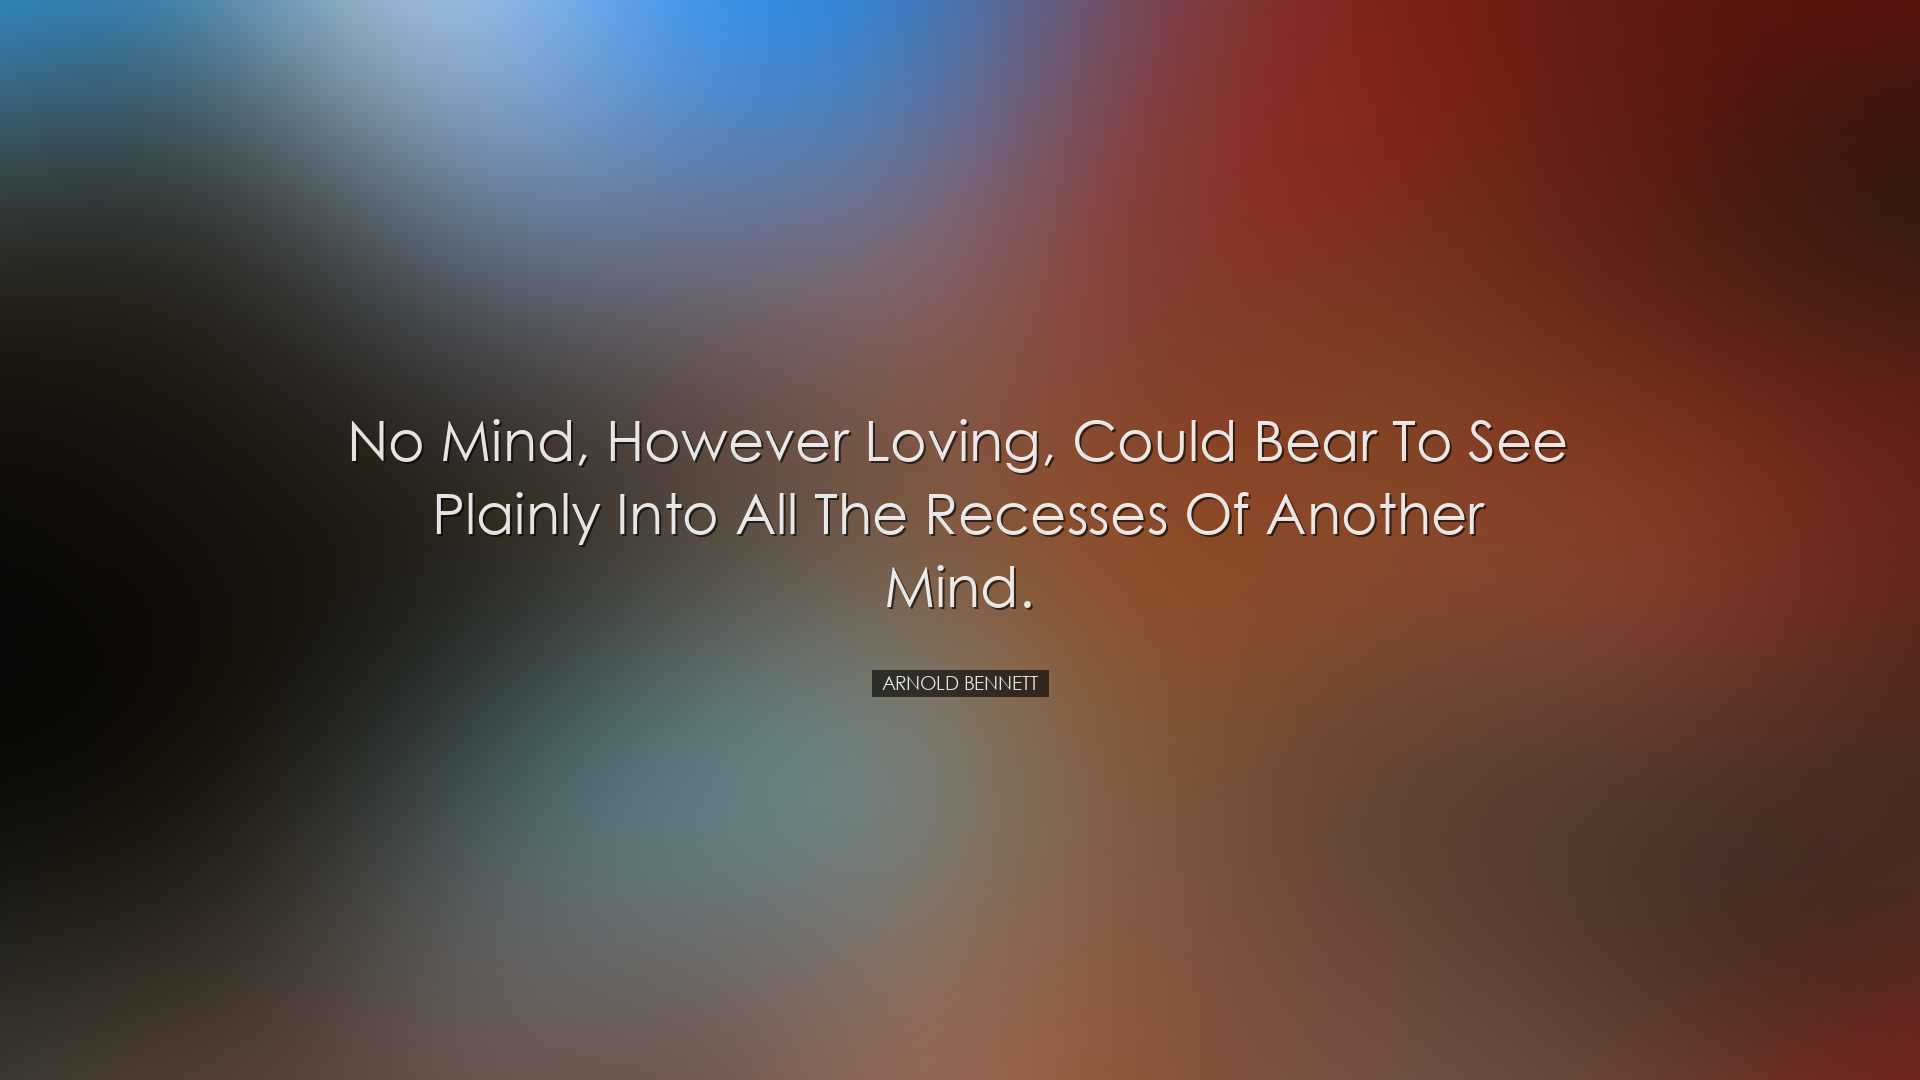 No mind, however loving, could bear to see plainly into all the re